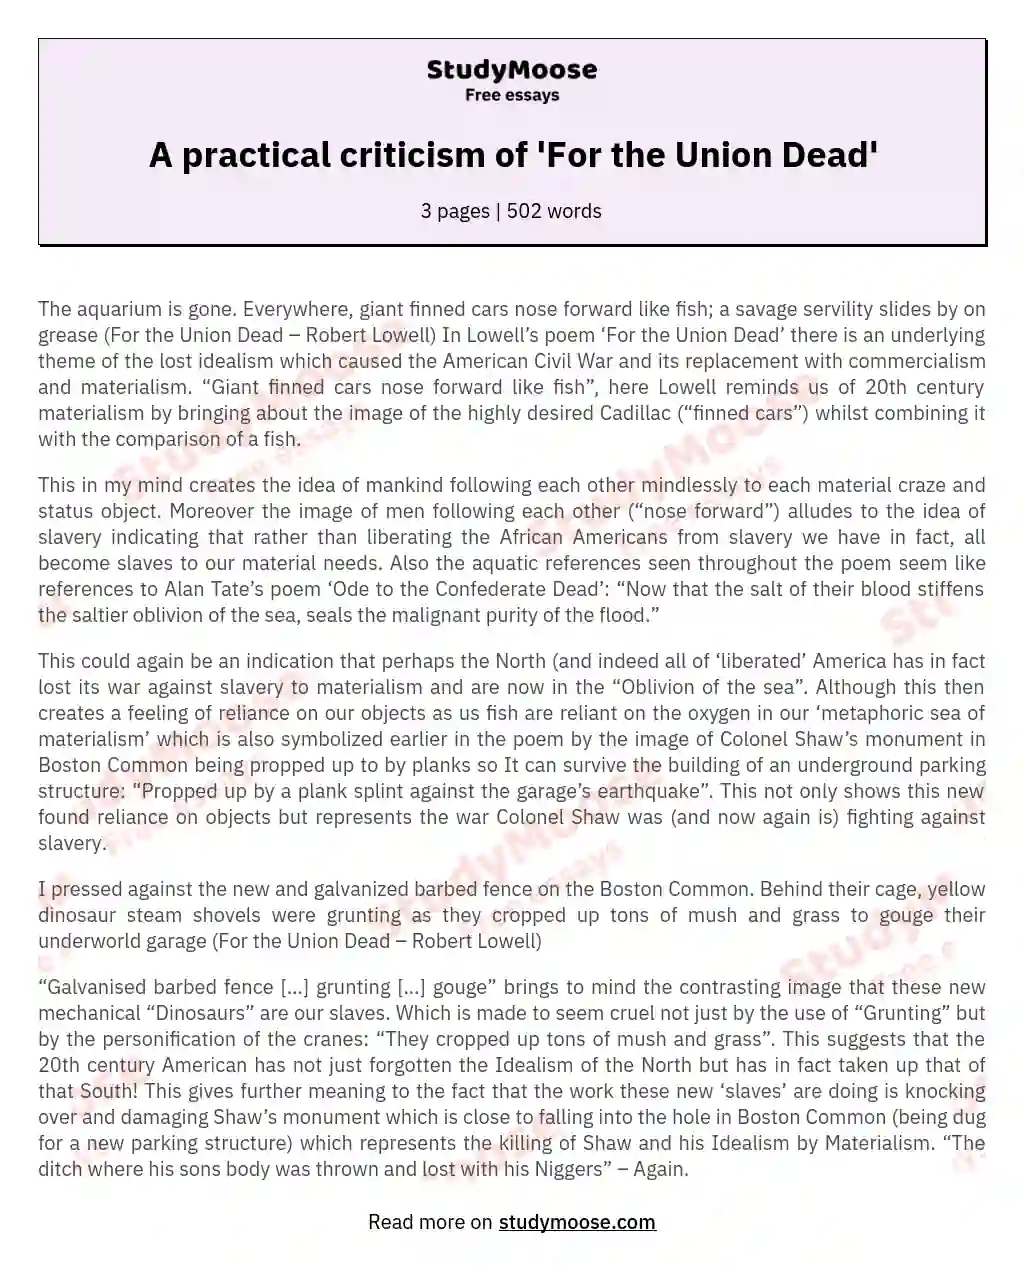 A practical criticism of 'For the Union Dead'